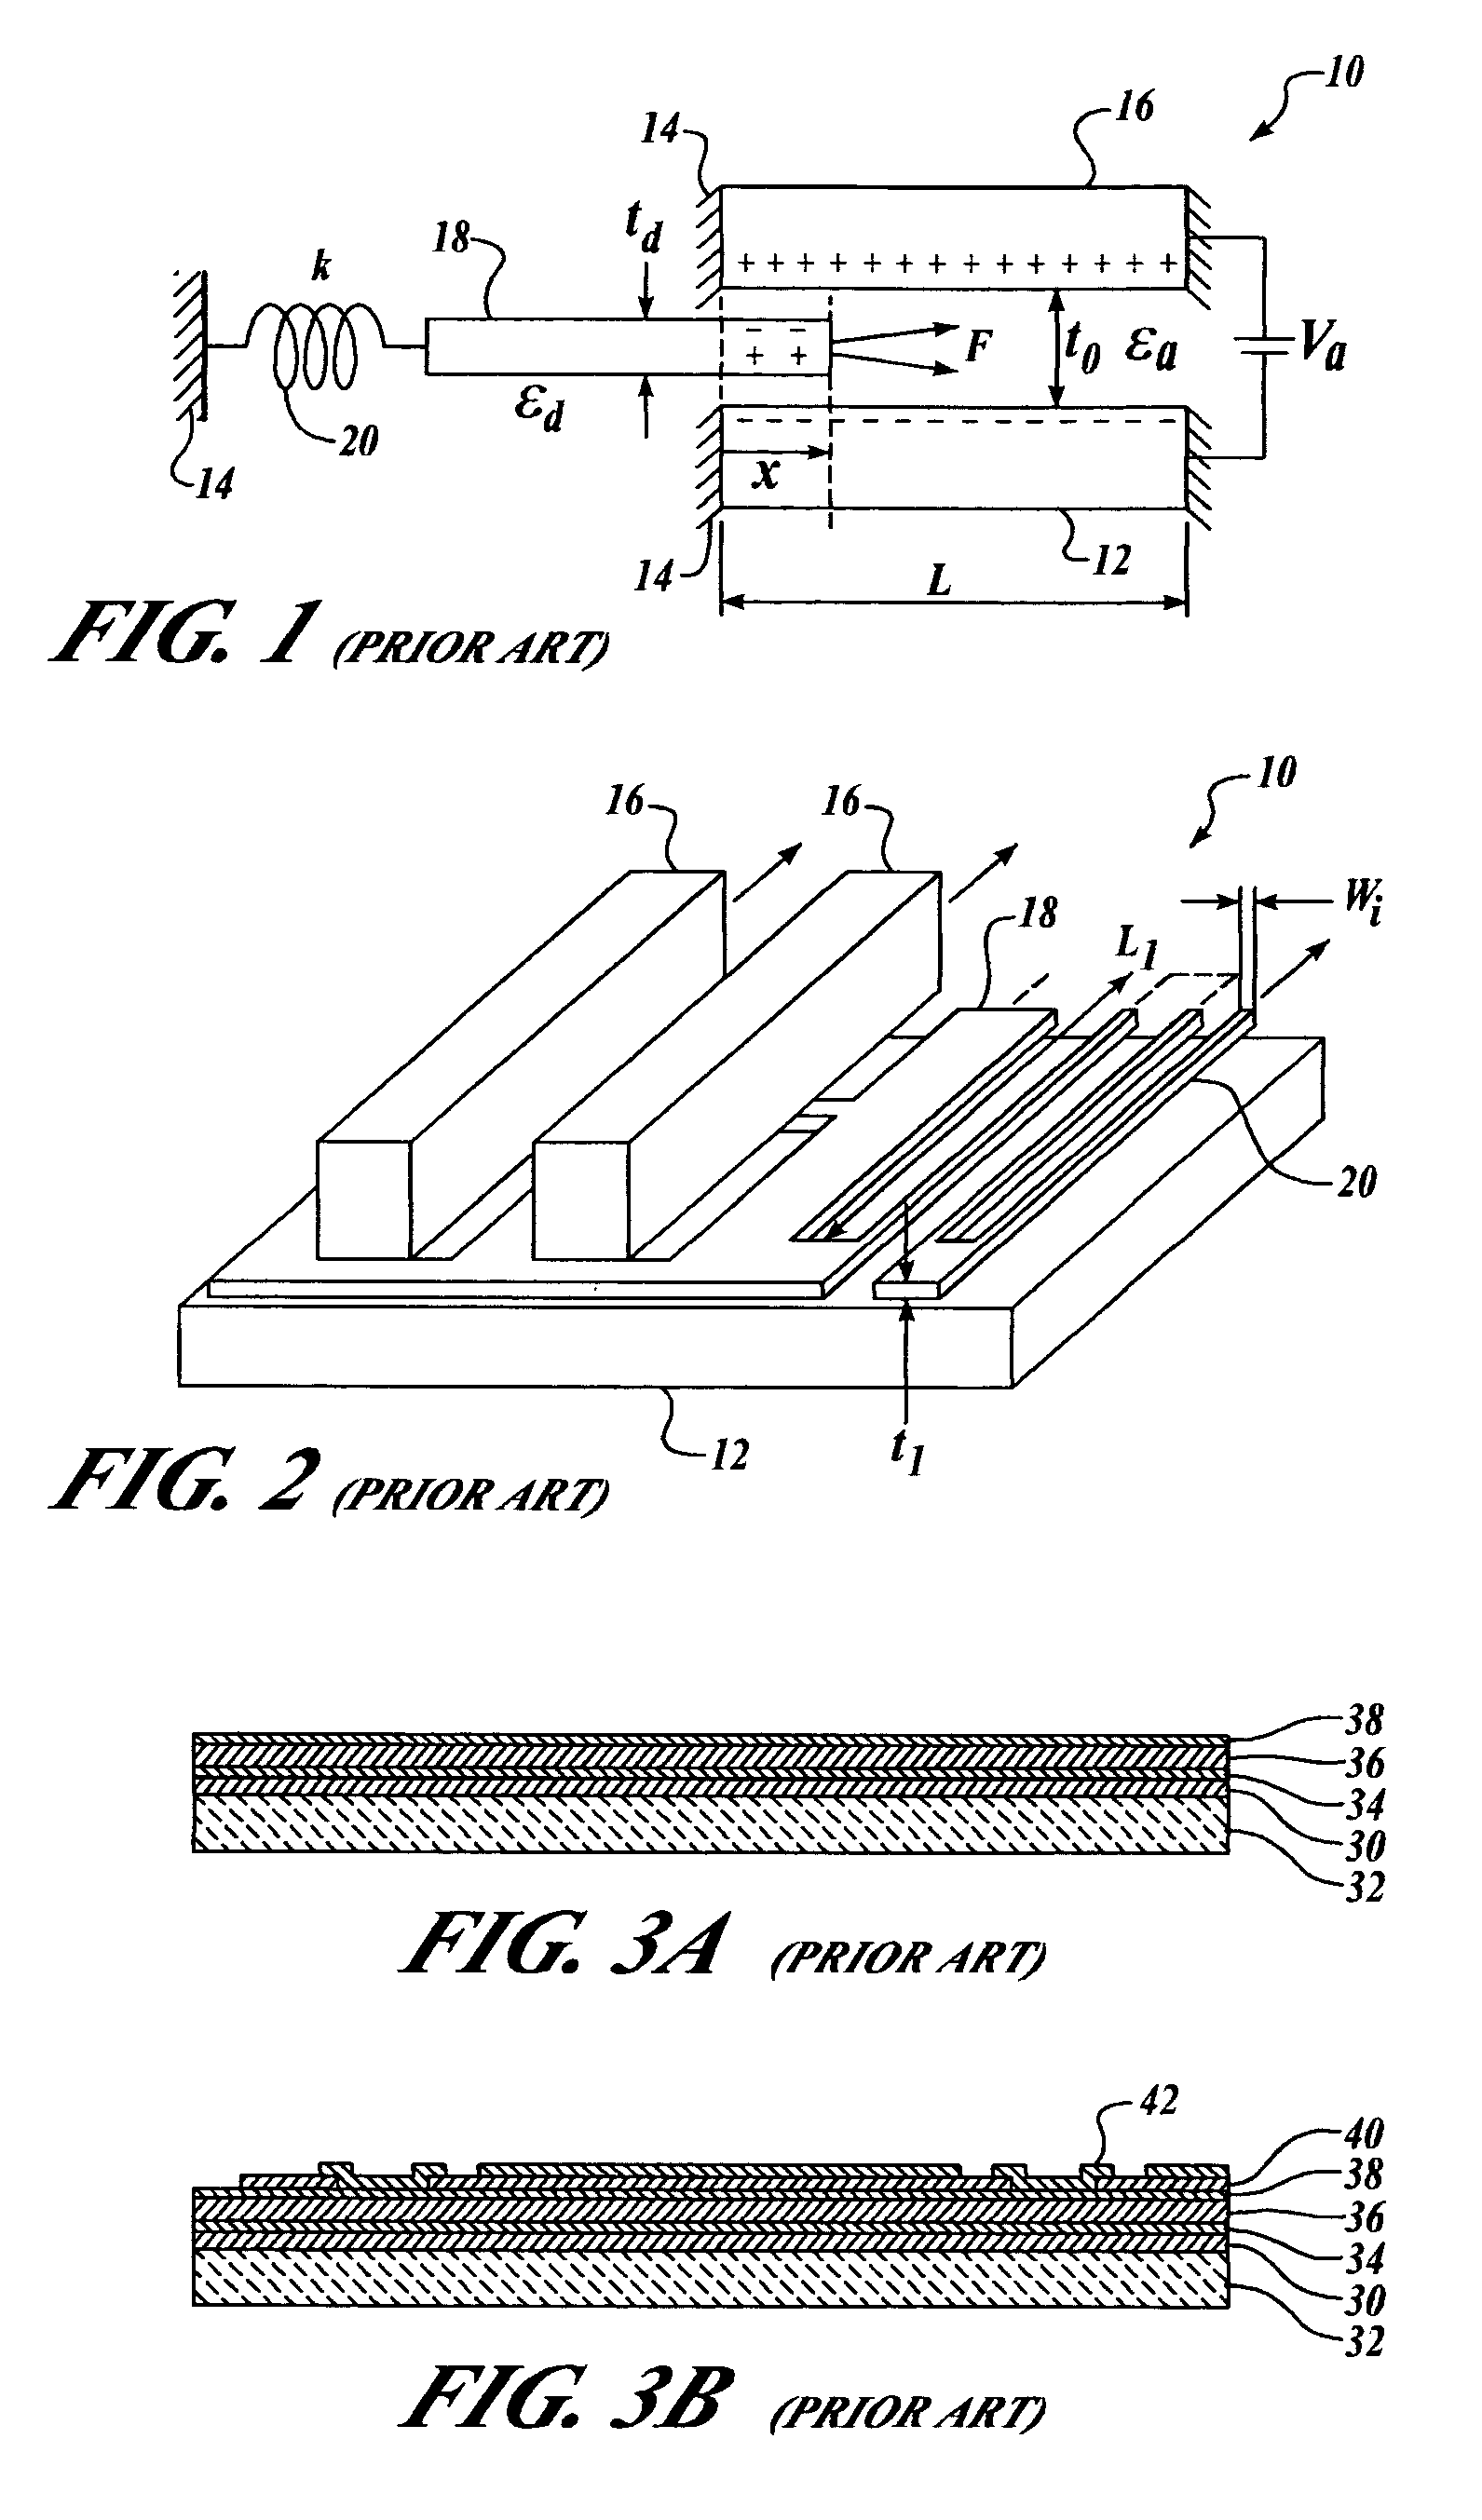 Method of manufacturing vibrating micromechanical structures